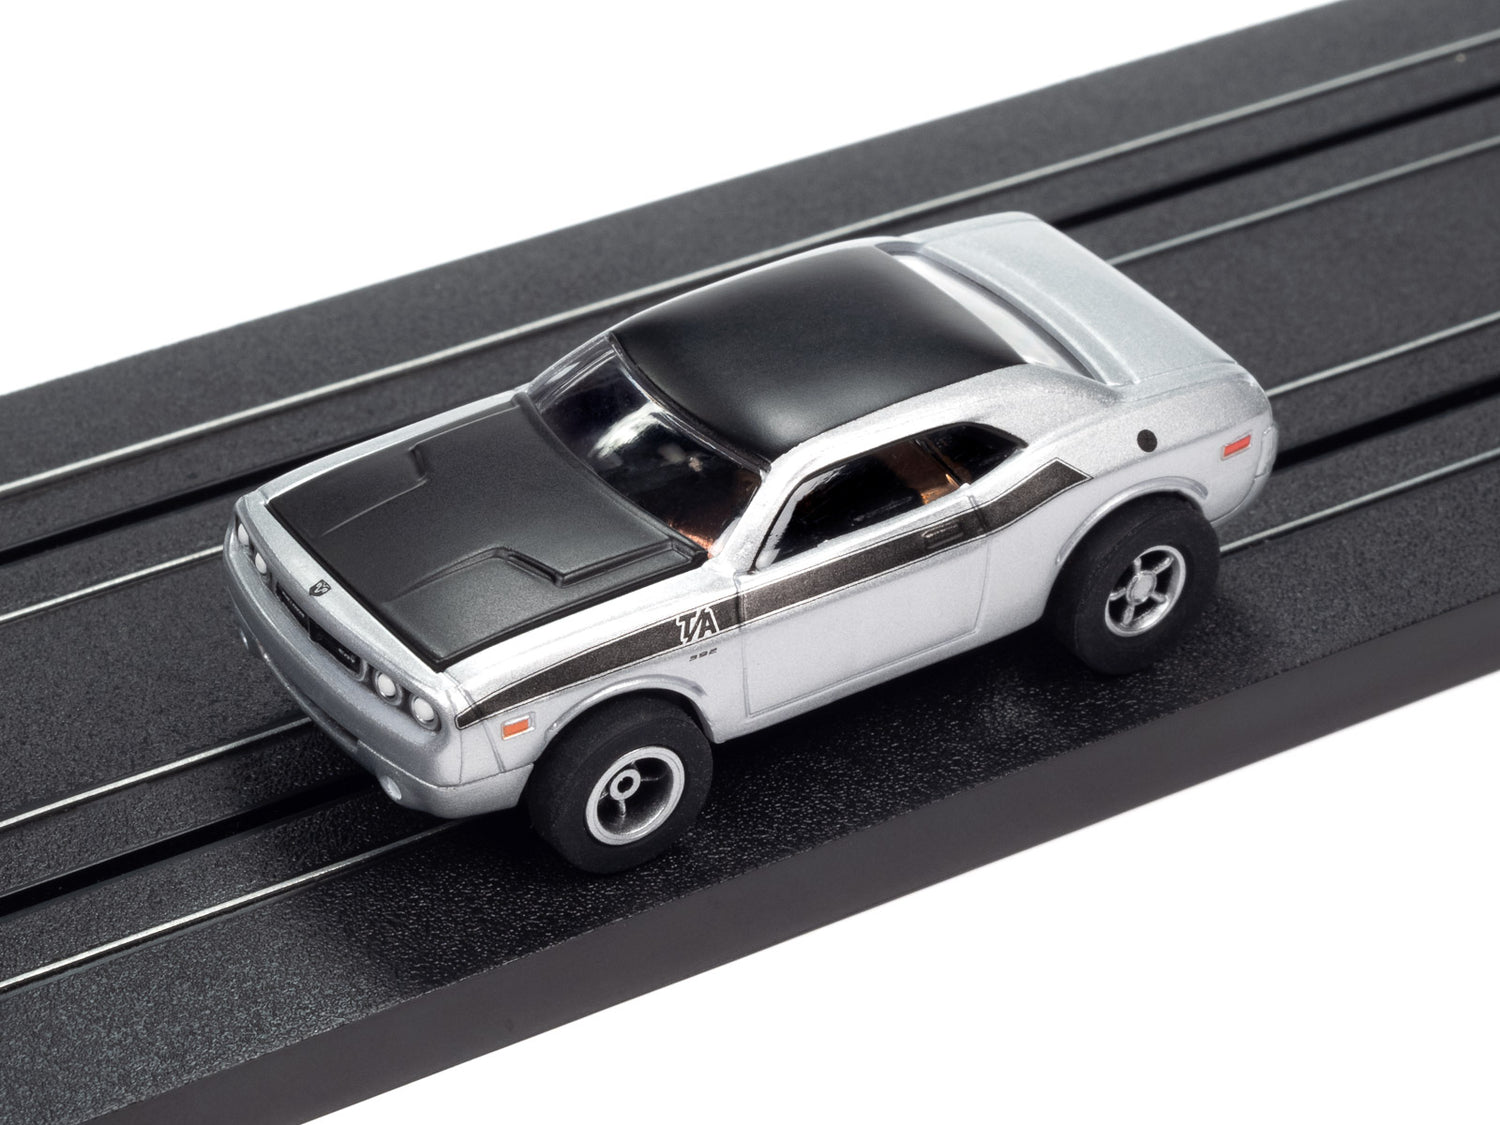 Auto World Xtraction 2012 Dodge Challenger (Silver) HO Scale Slot Car